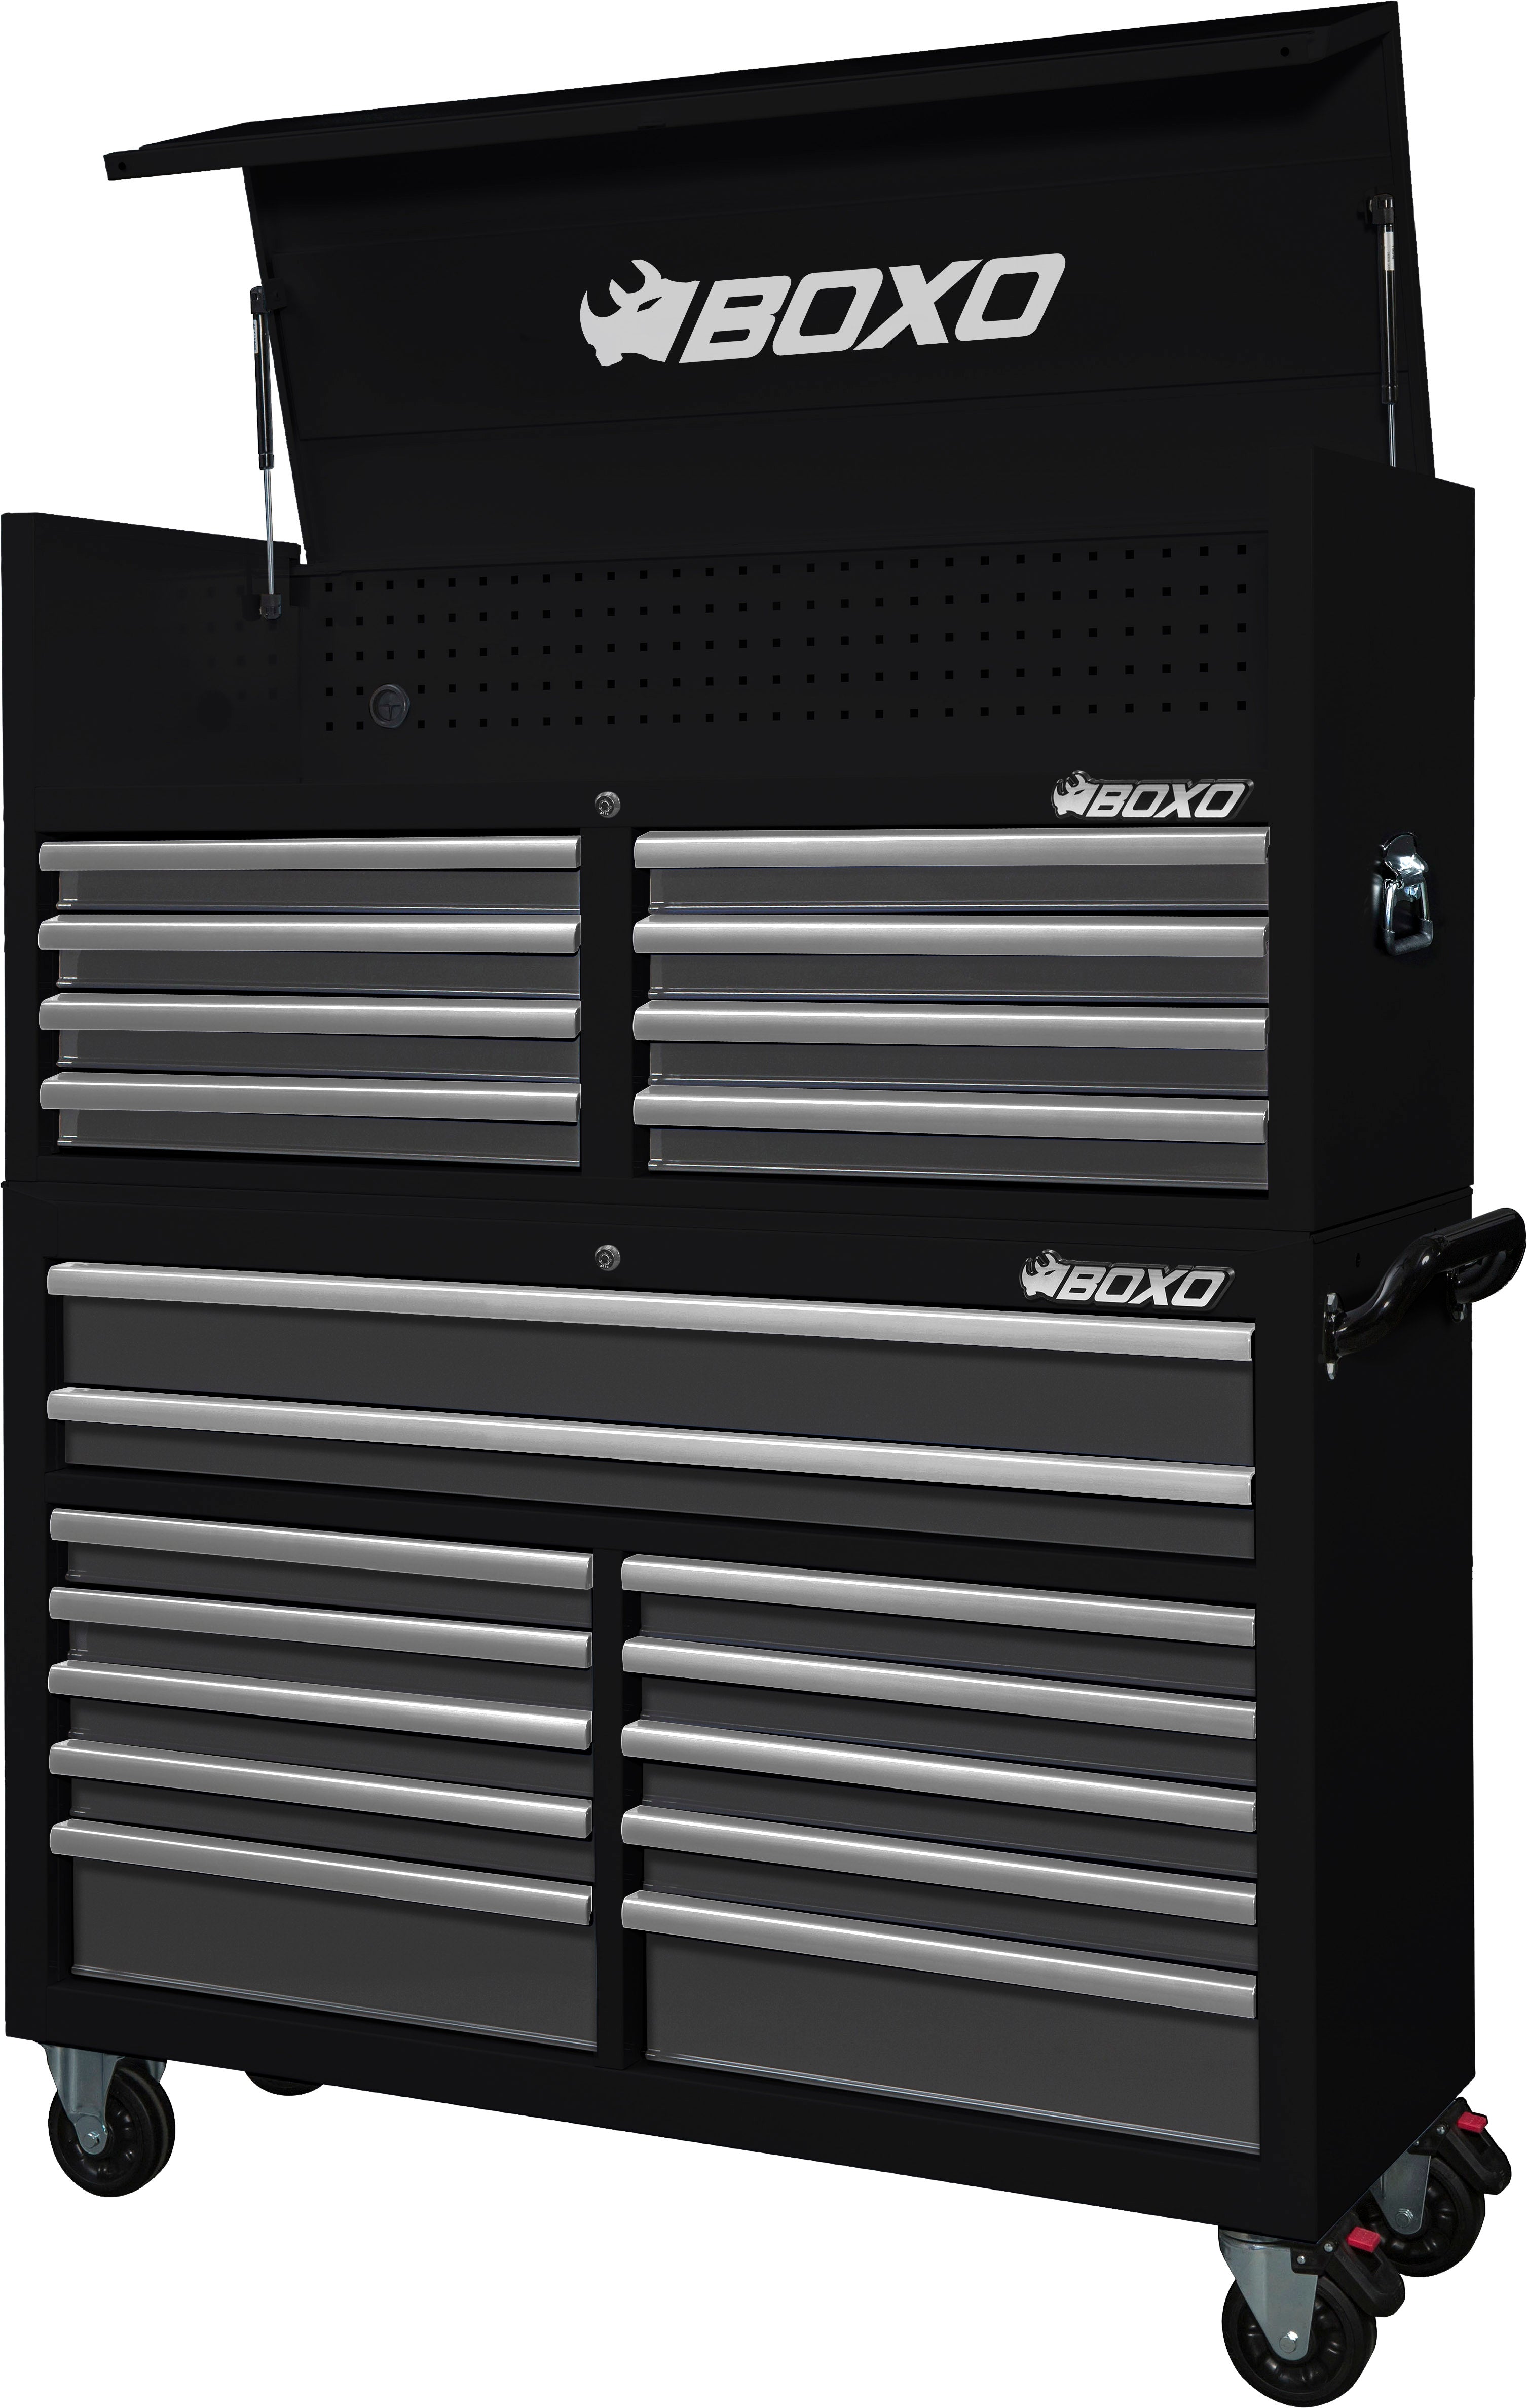 BOXO 53" 20 Drawer Toolbox Stack with Drawer Trim Pack - Black Body with Trim Colour Options